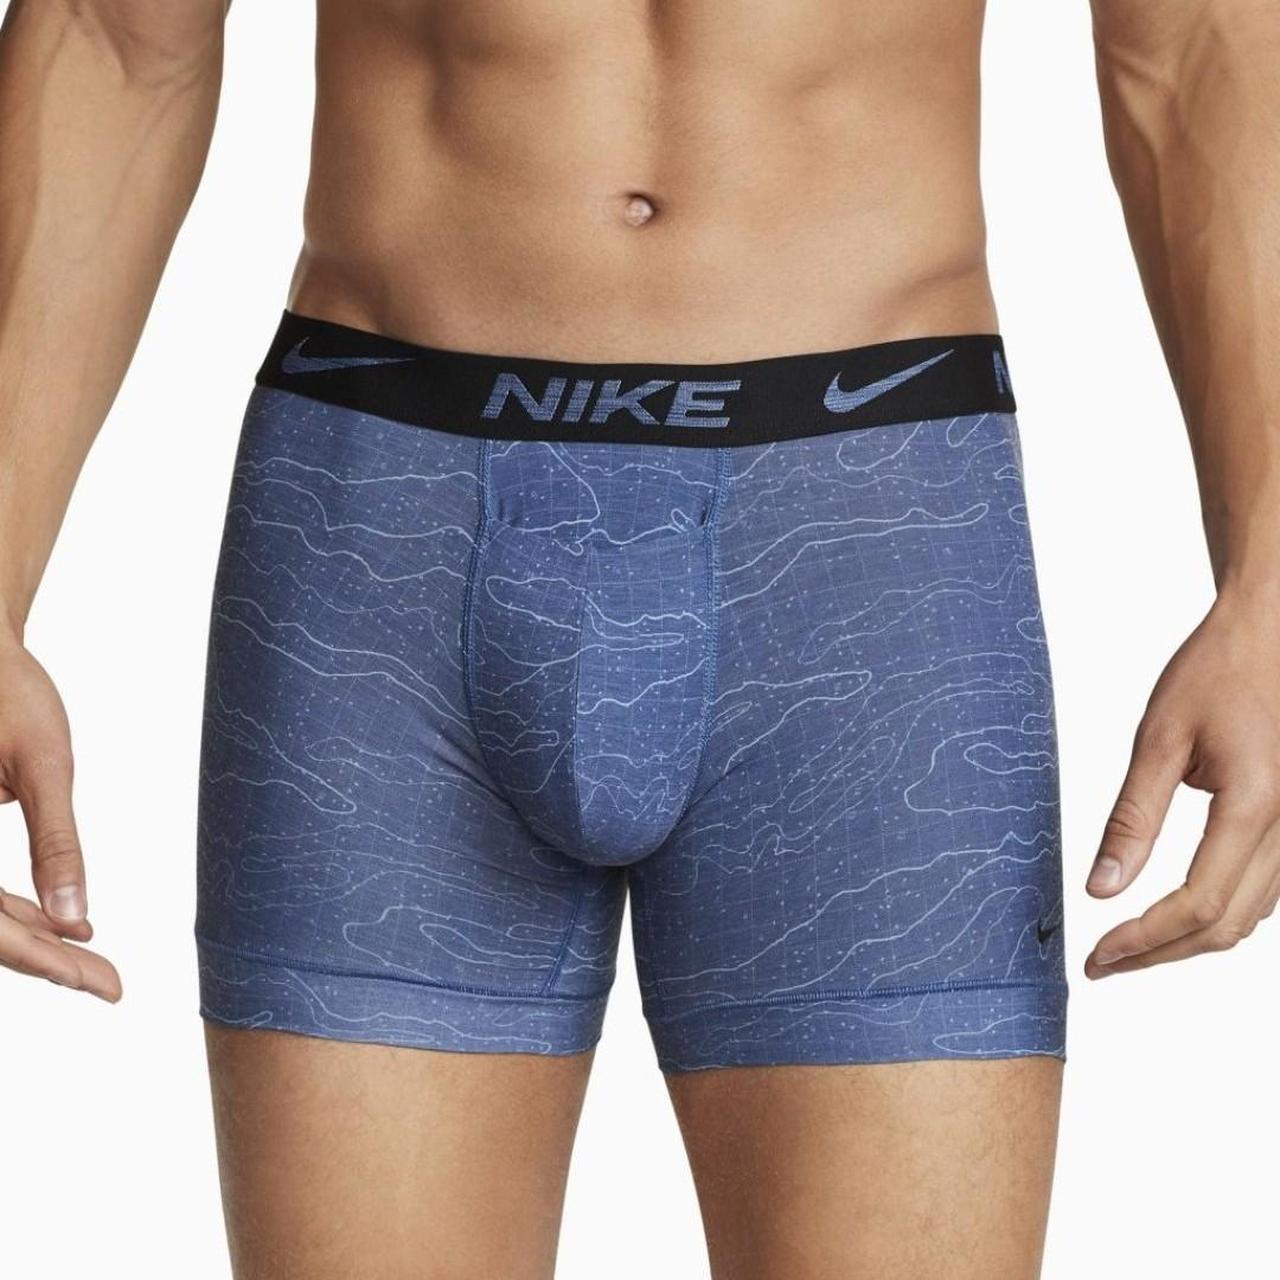 Nike Men's Blue and Navy Boxers-and-briefs (3)